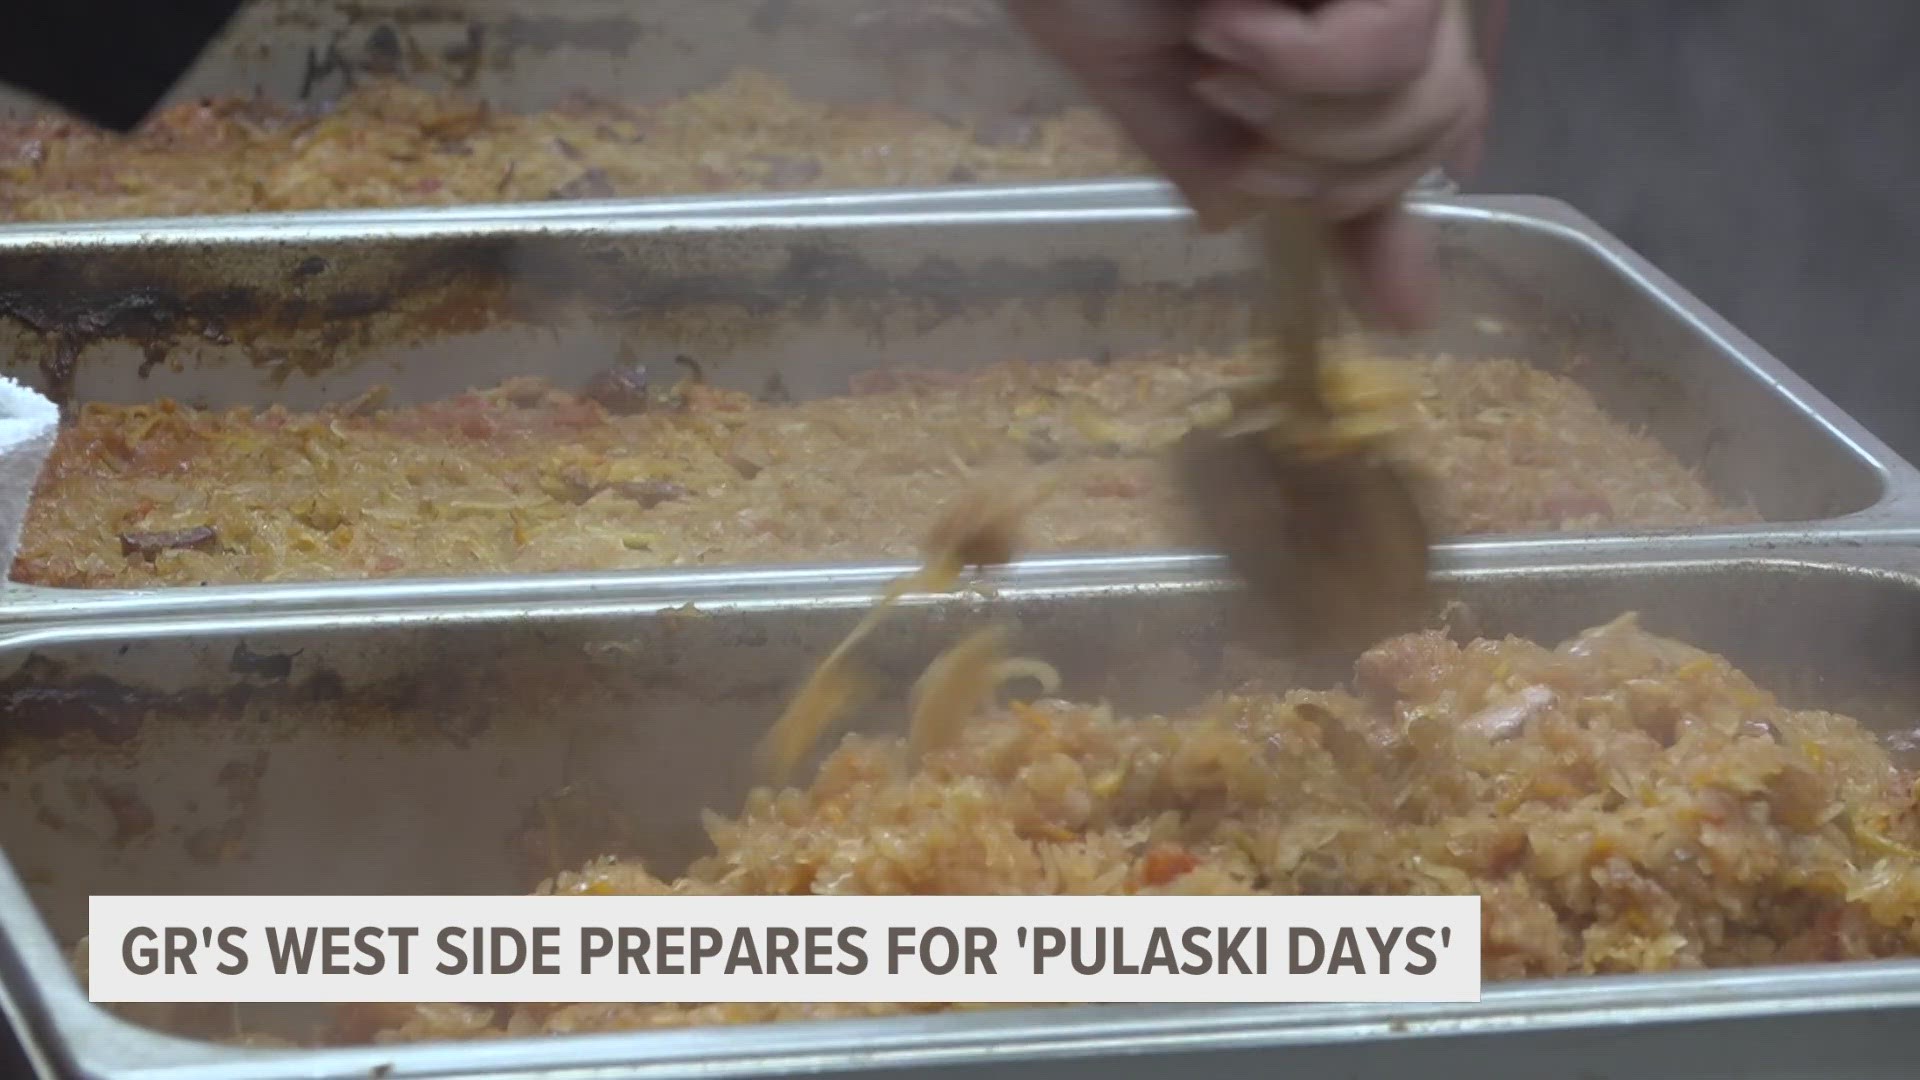 The annual celebration of Polish heritage held every October is underway in Grand Rapids.